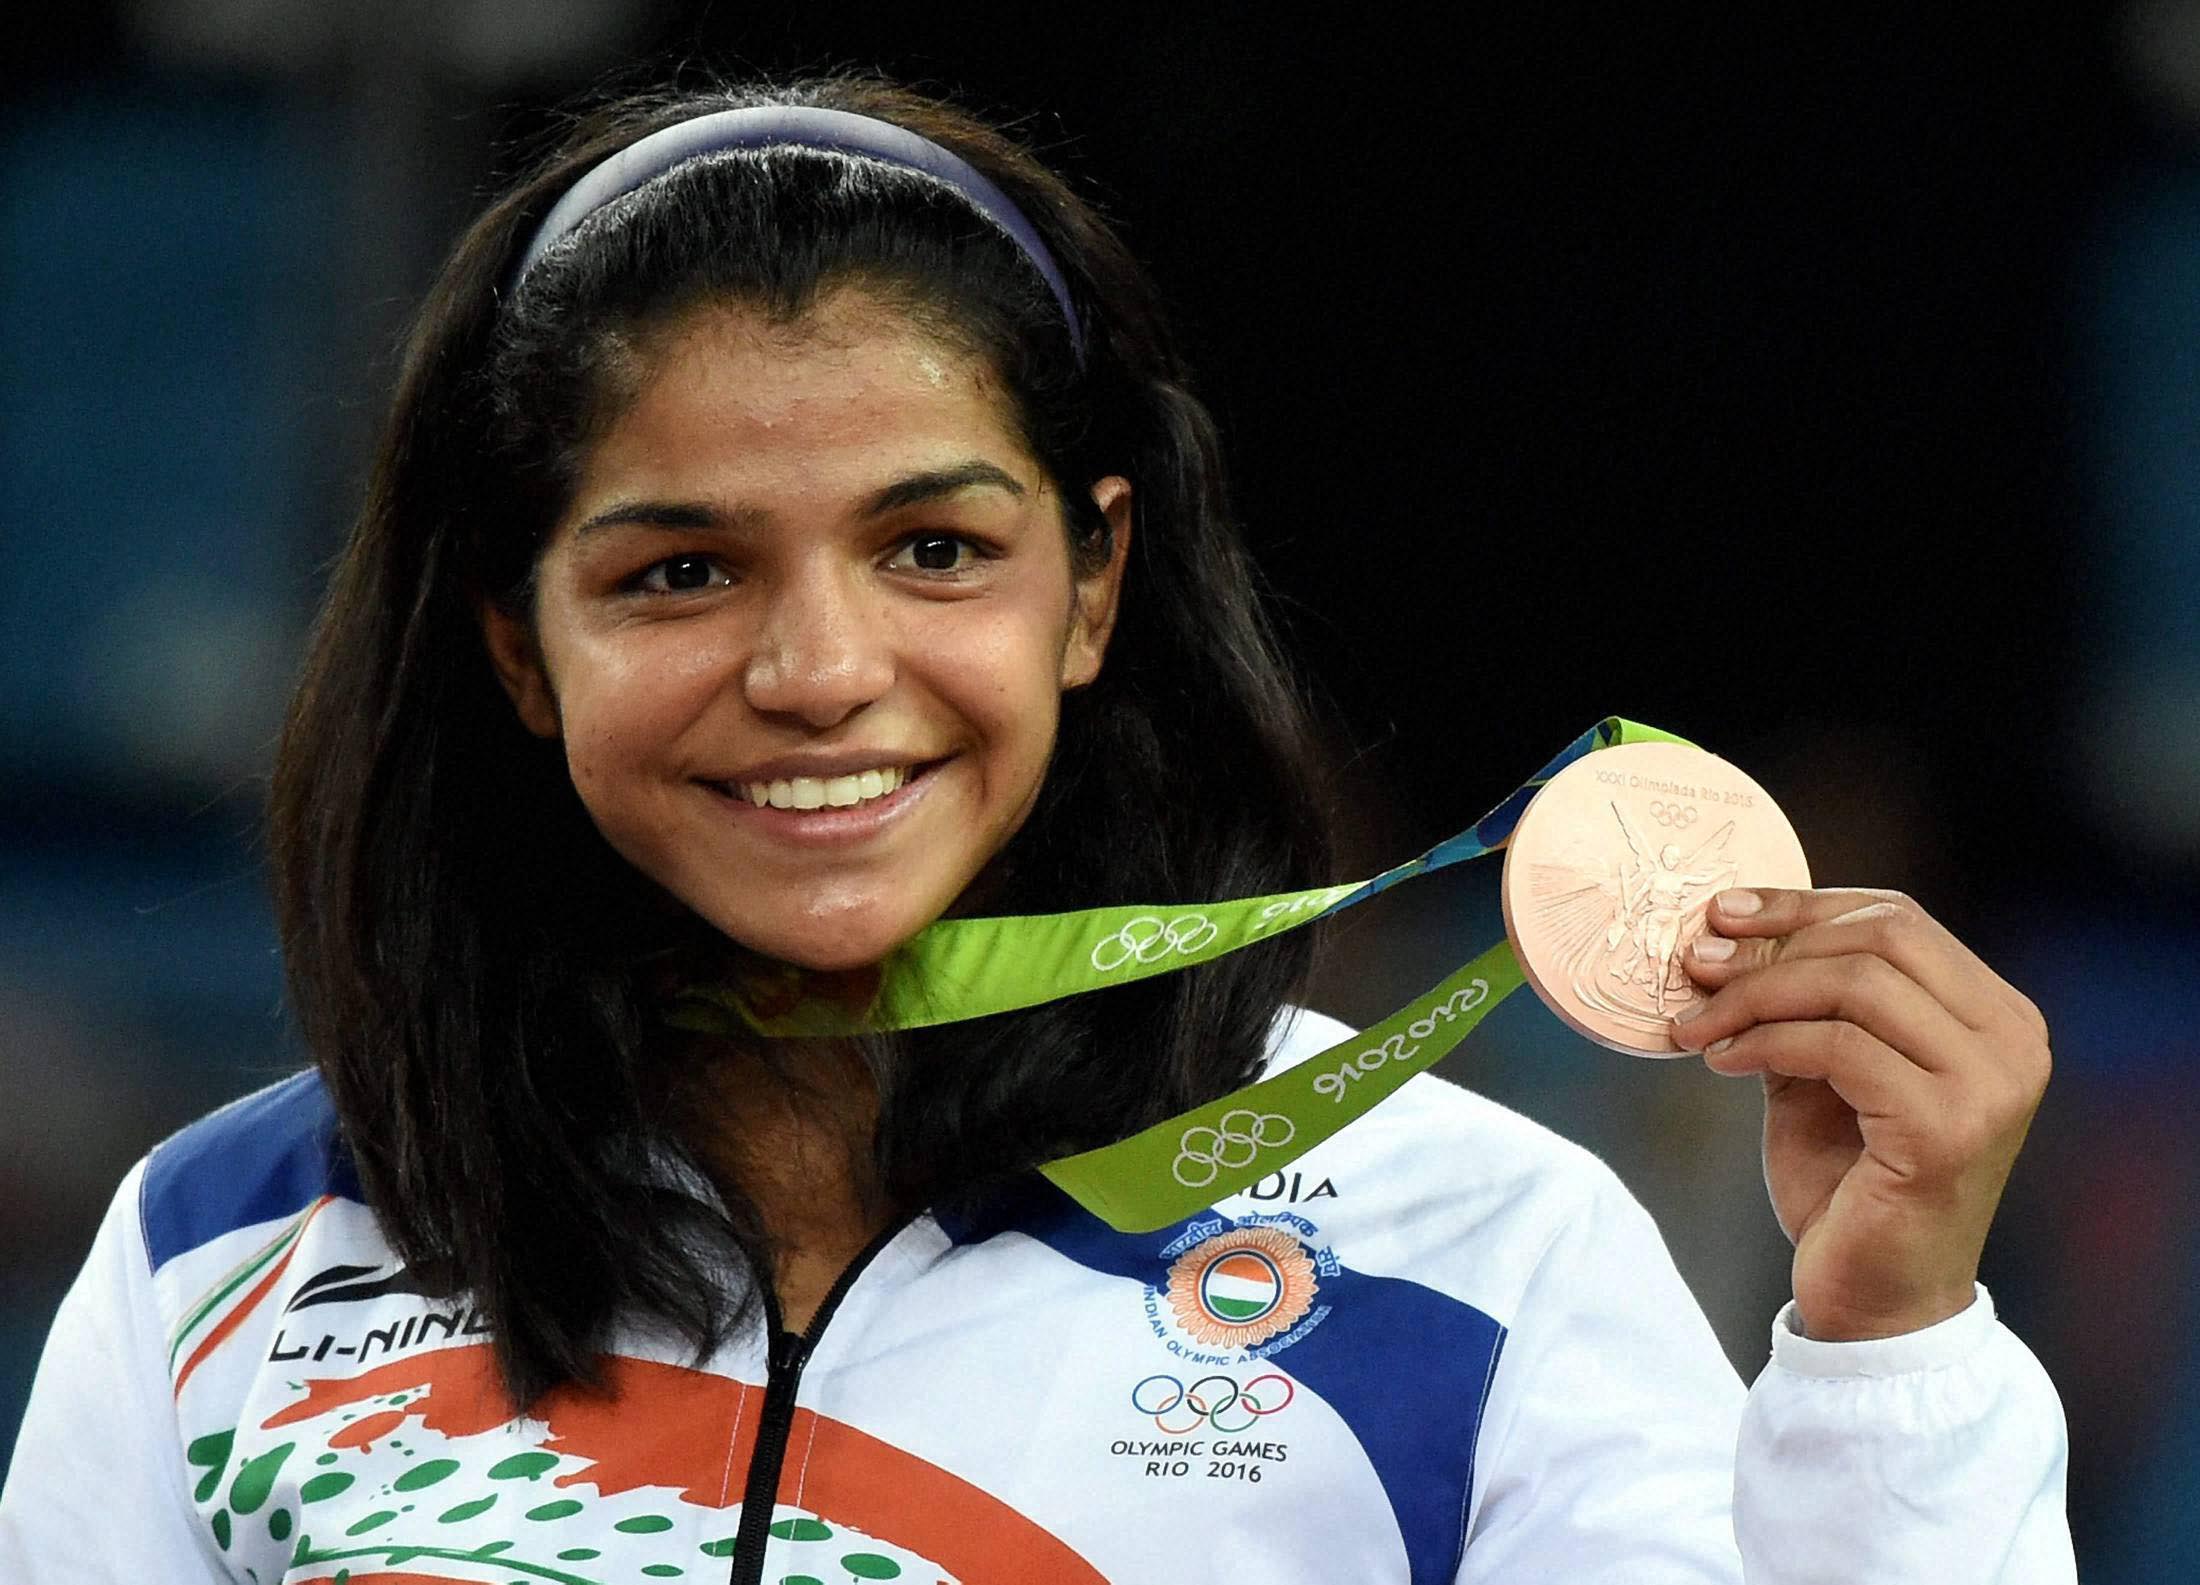 Rio de Janeiro: India's Sakshi Malik poses with her bronze medal for the women's wrestling freestyle 58-kg competition during the medals ceremony at the 2016 Summer Olympics in Rio de Janeiro, Brazil, Wednesday. PTI Photo by Atul Yadav(PTI8_18_2016_000011B)